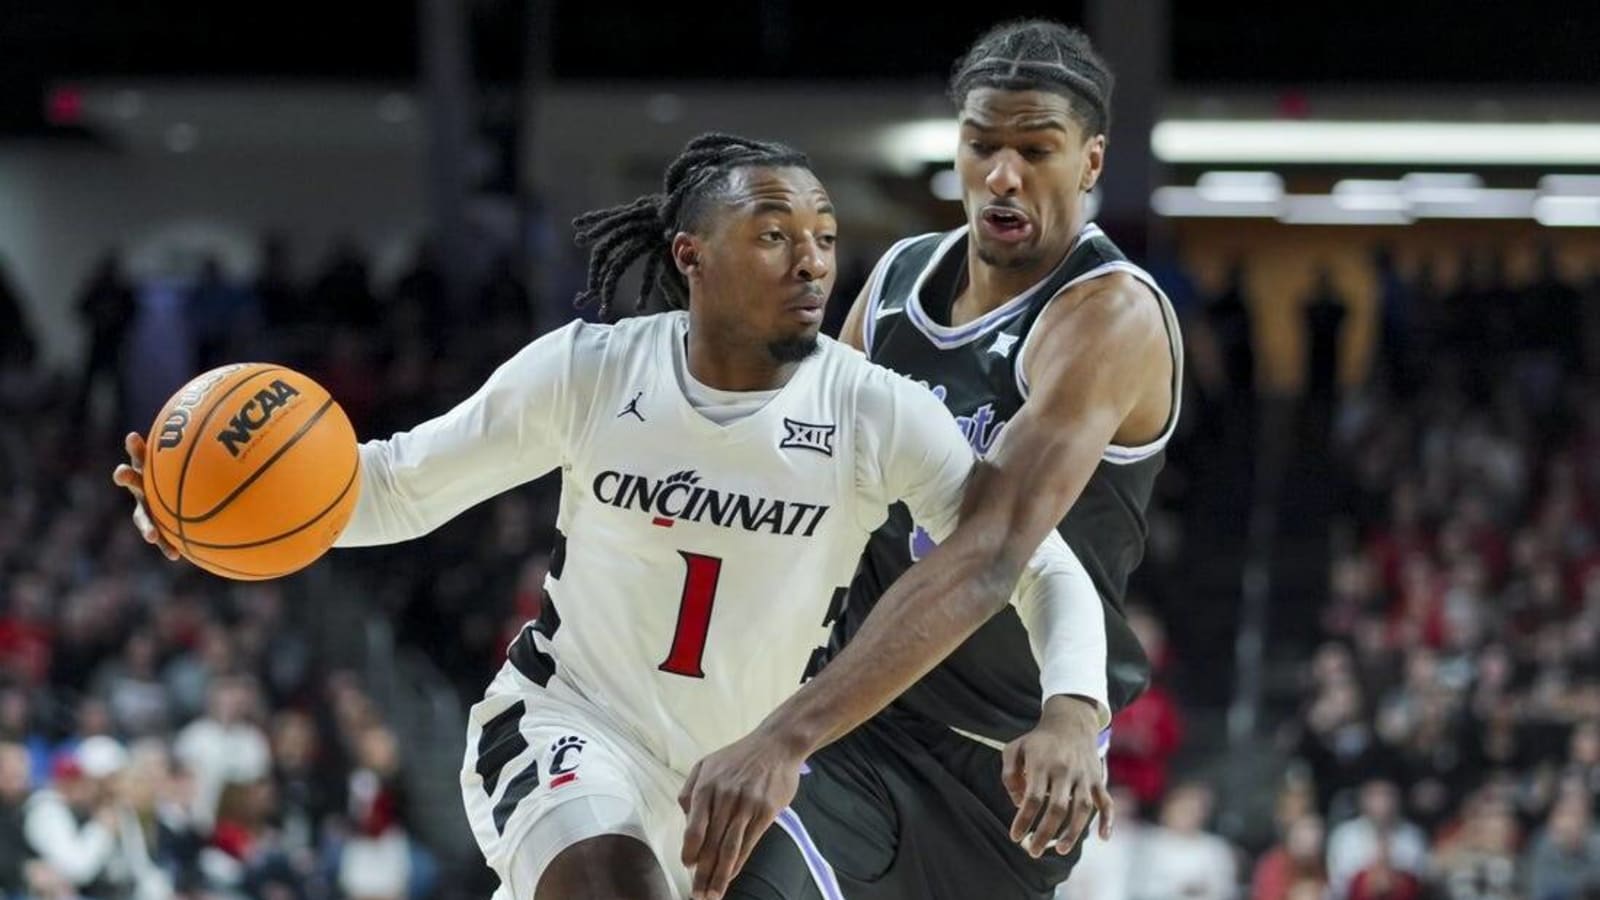 Late 3-pointer lifts Cincinnati over K-State, 74-72